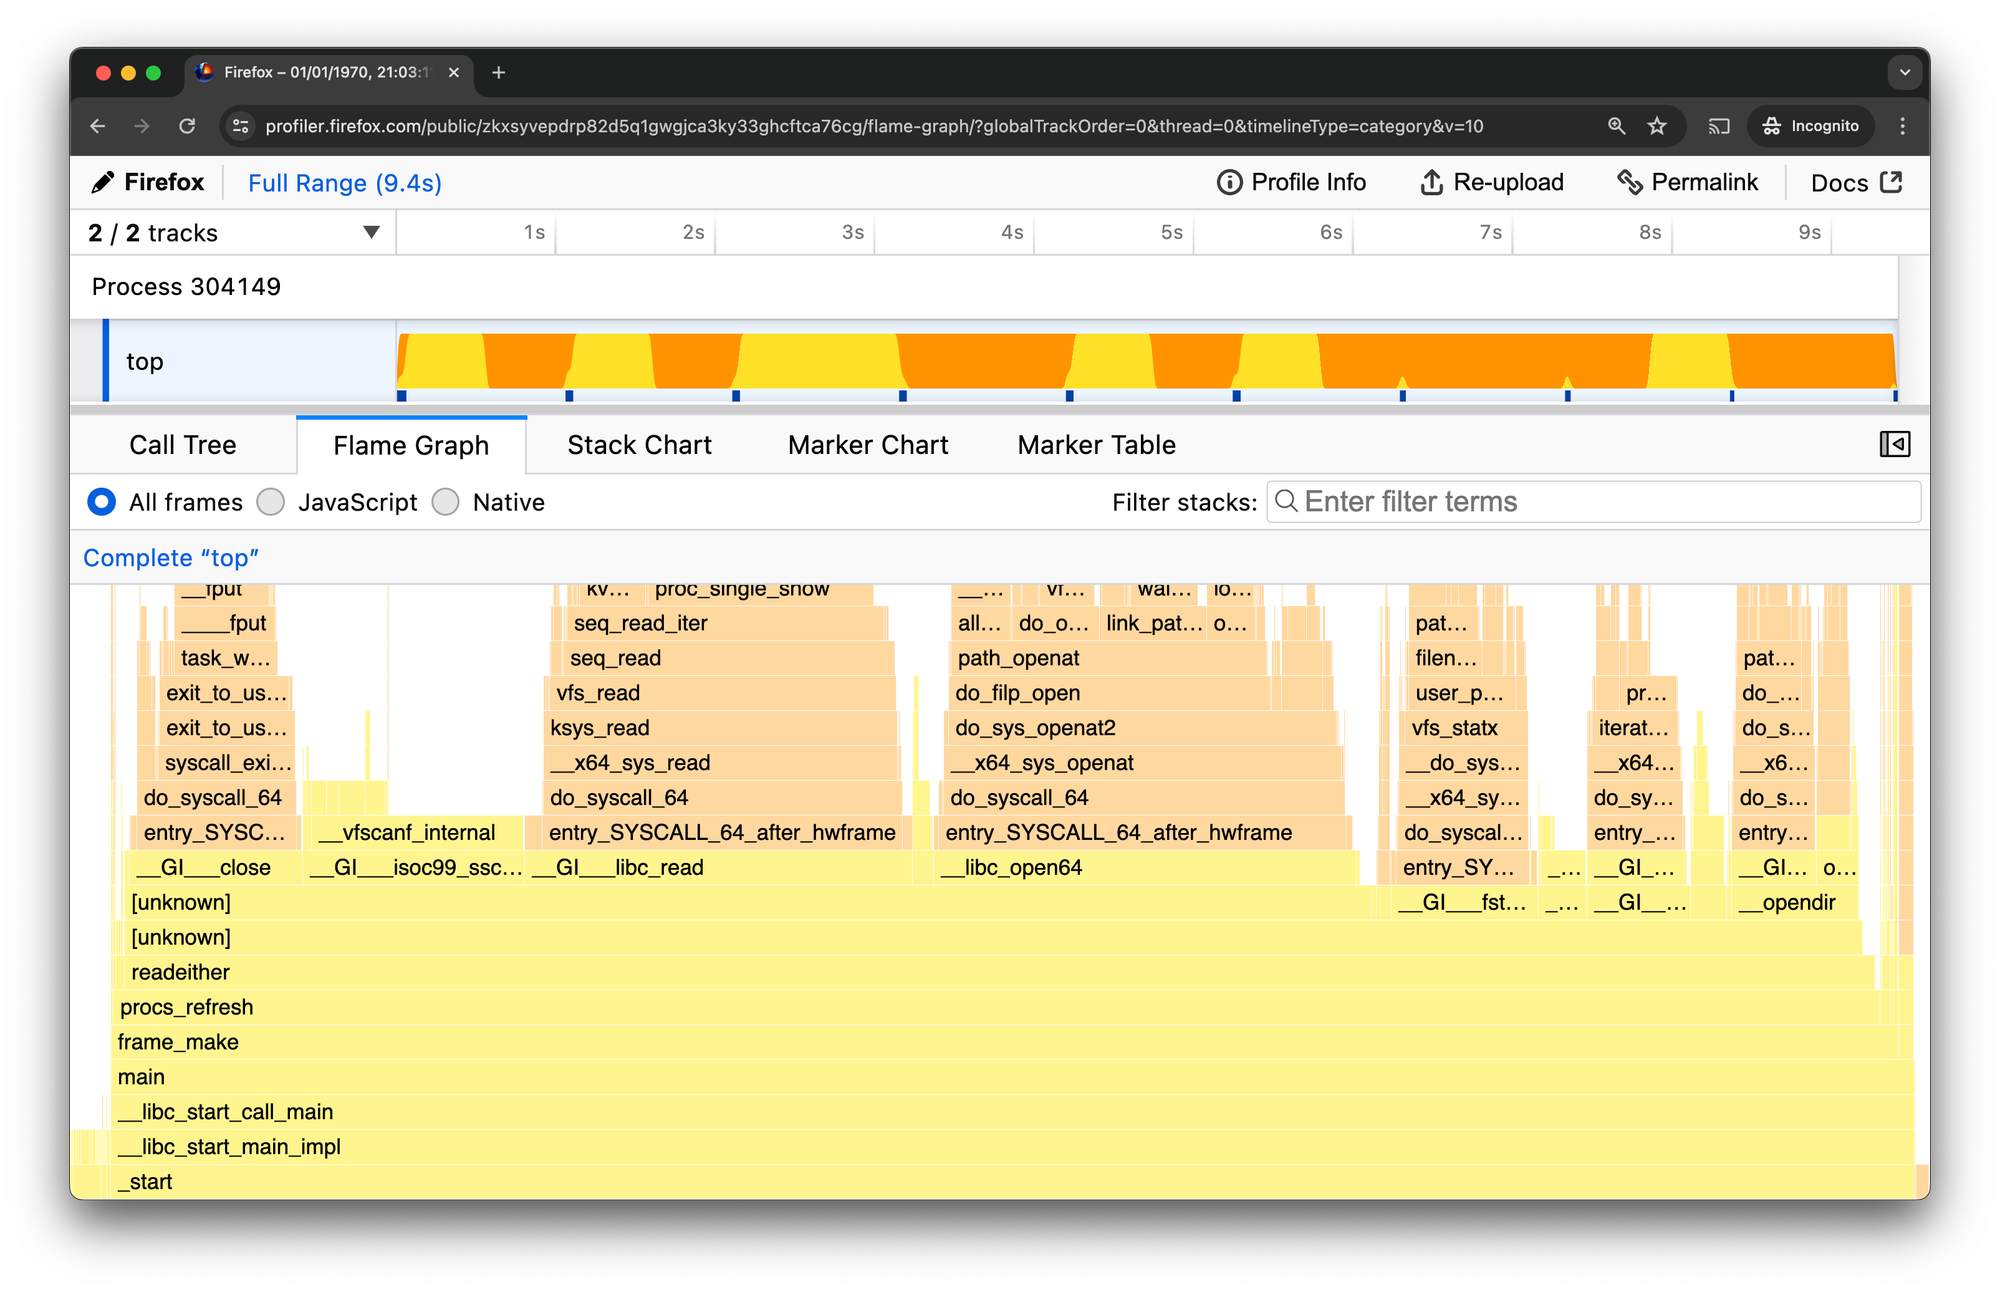 Firefox Profiler, opened to a profile, showing some full userland stacks like 'main' but some 'unknown' userland stack frames.